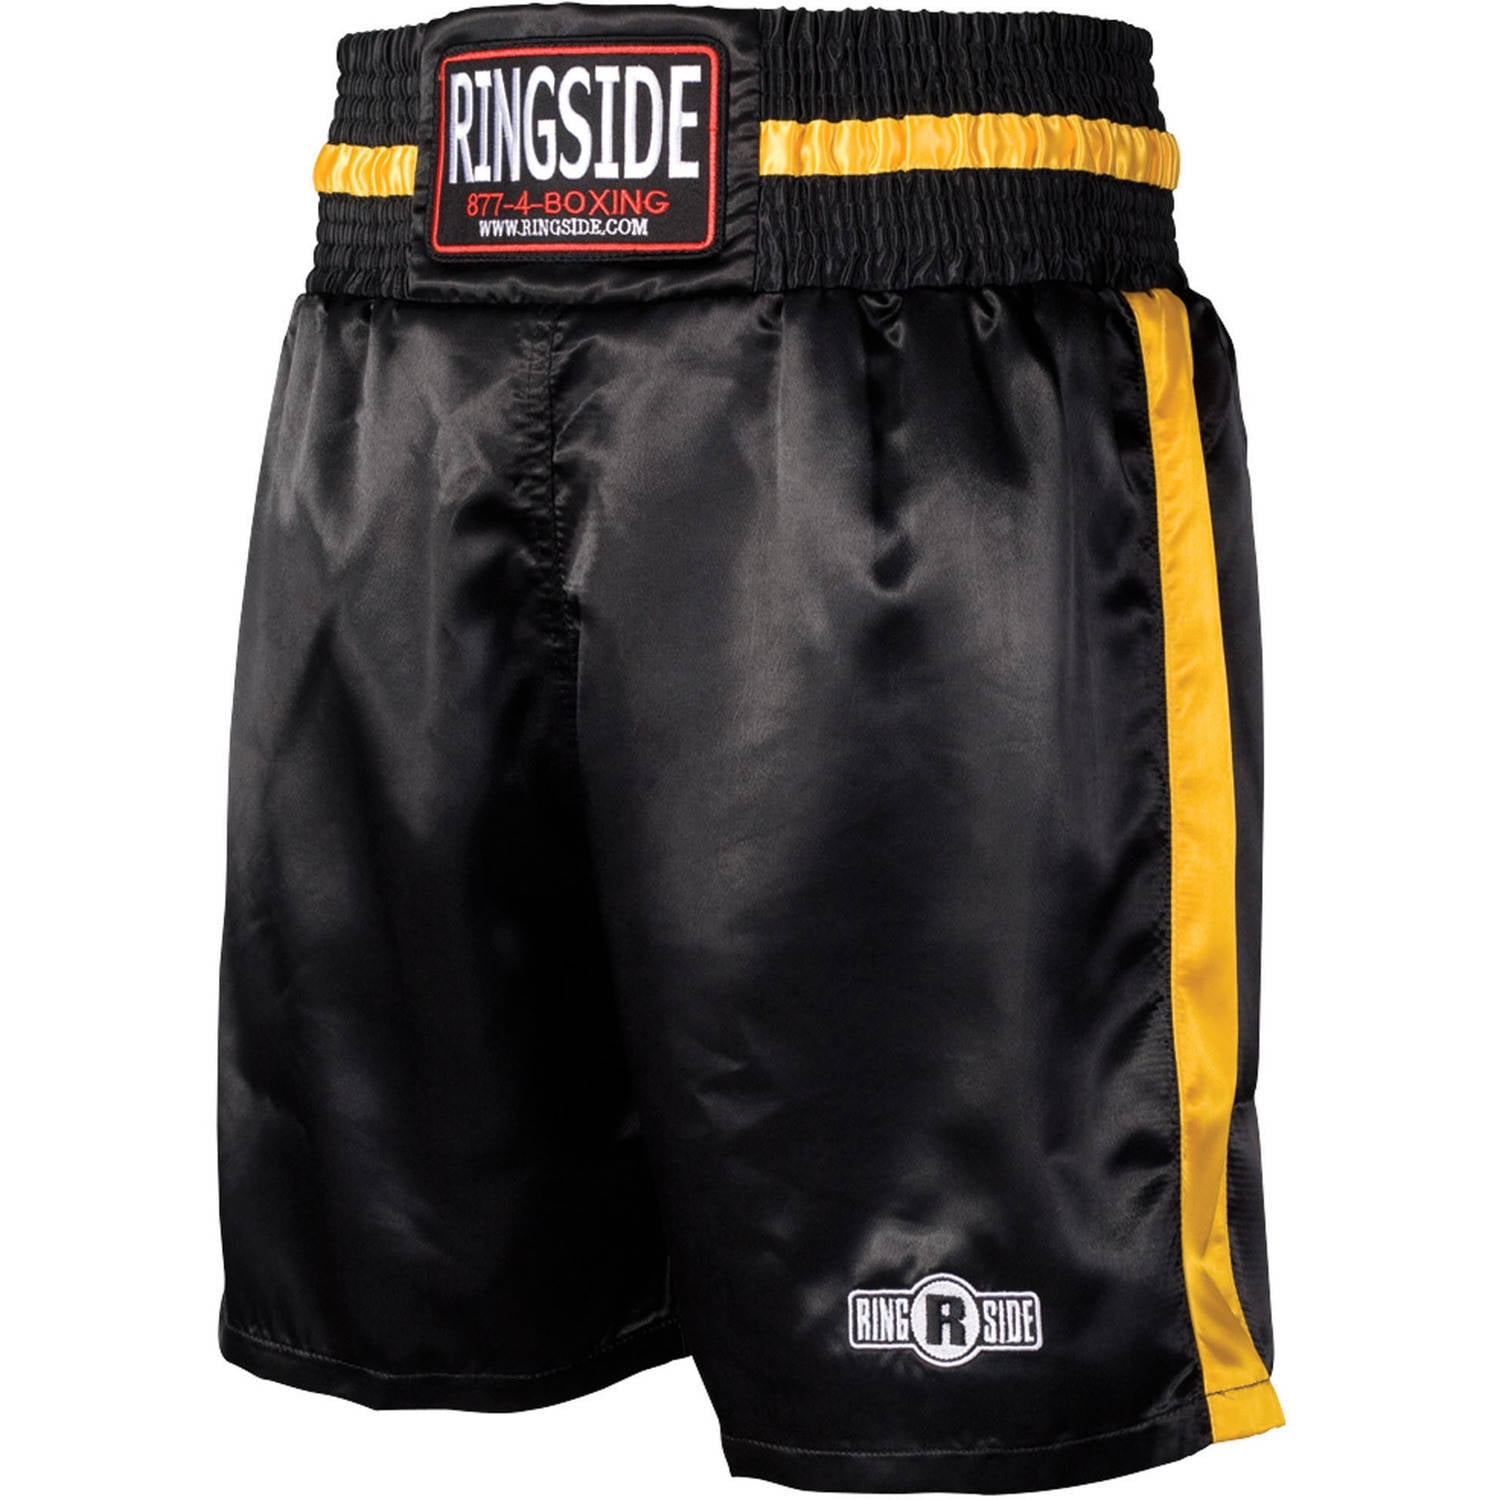 Free Shirt Fighting Sports Pro Stock Boxing Trunks Various Colors Size Small 